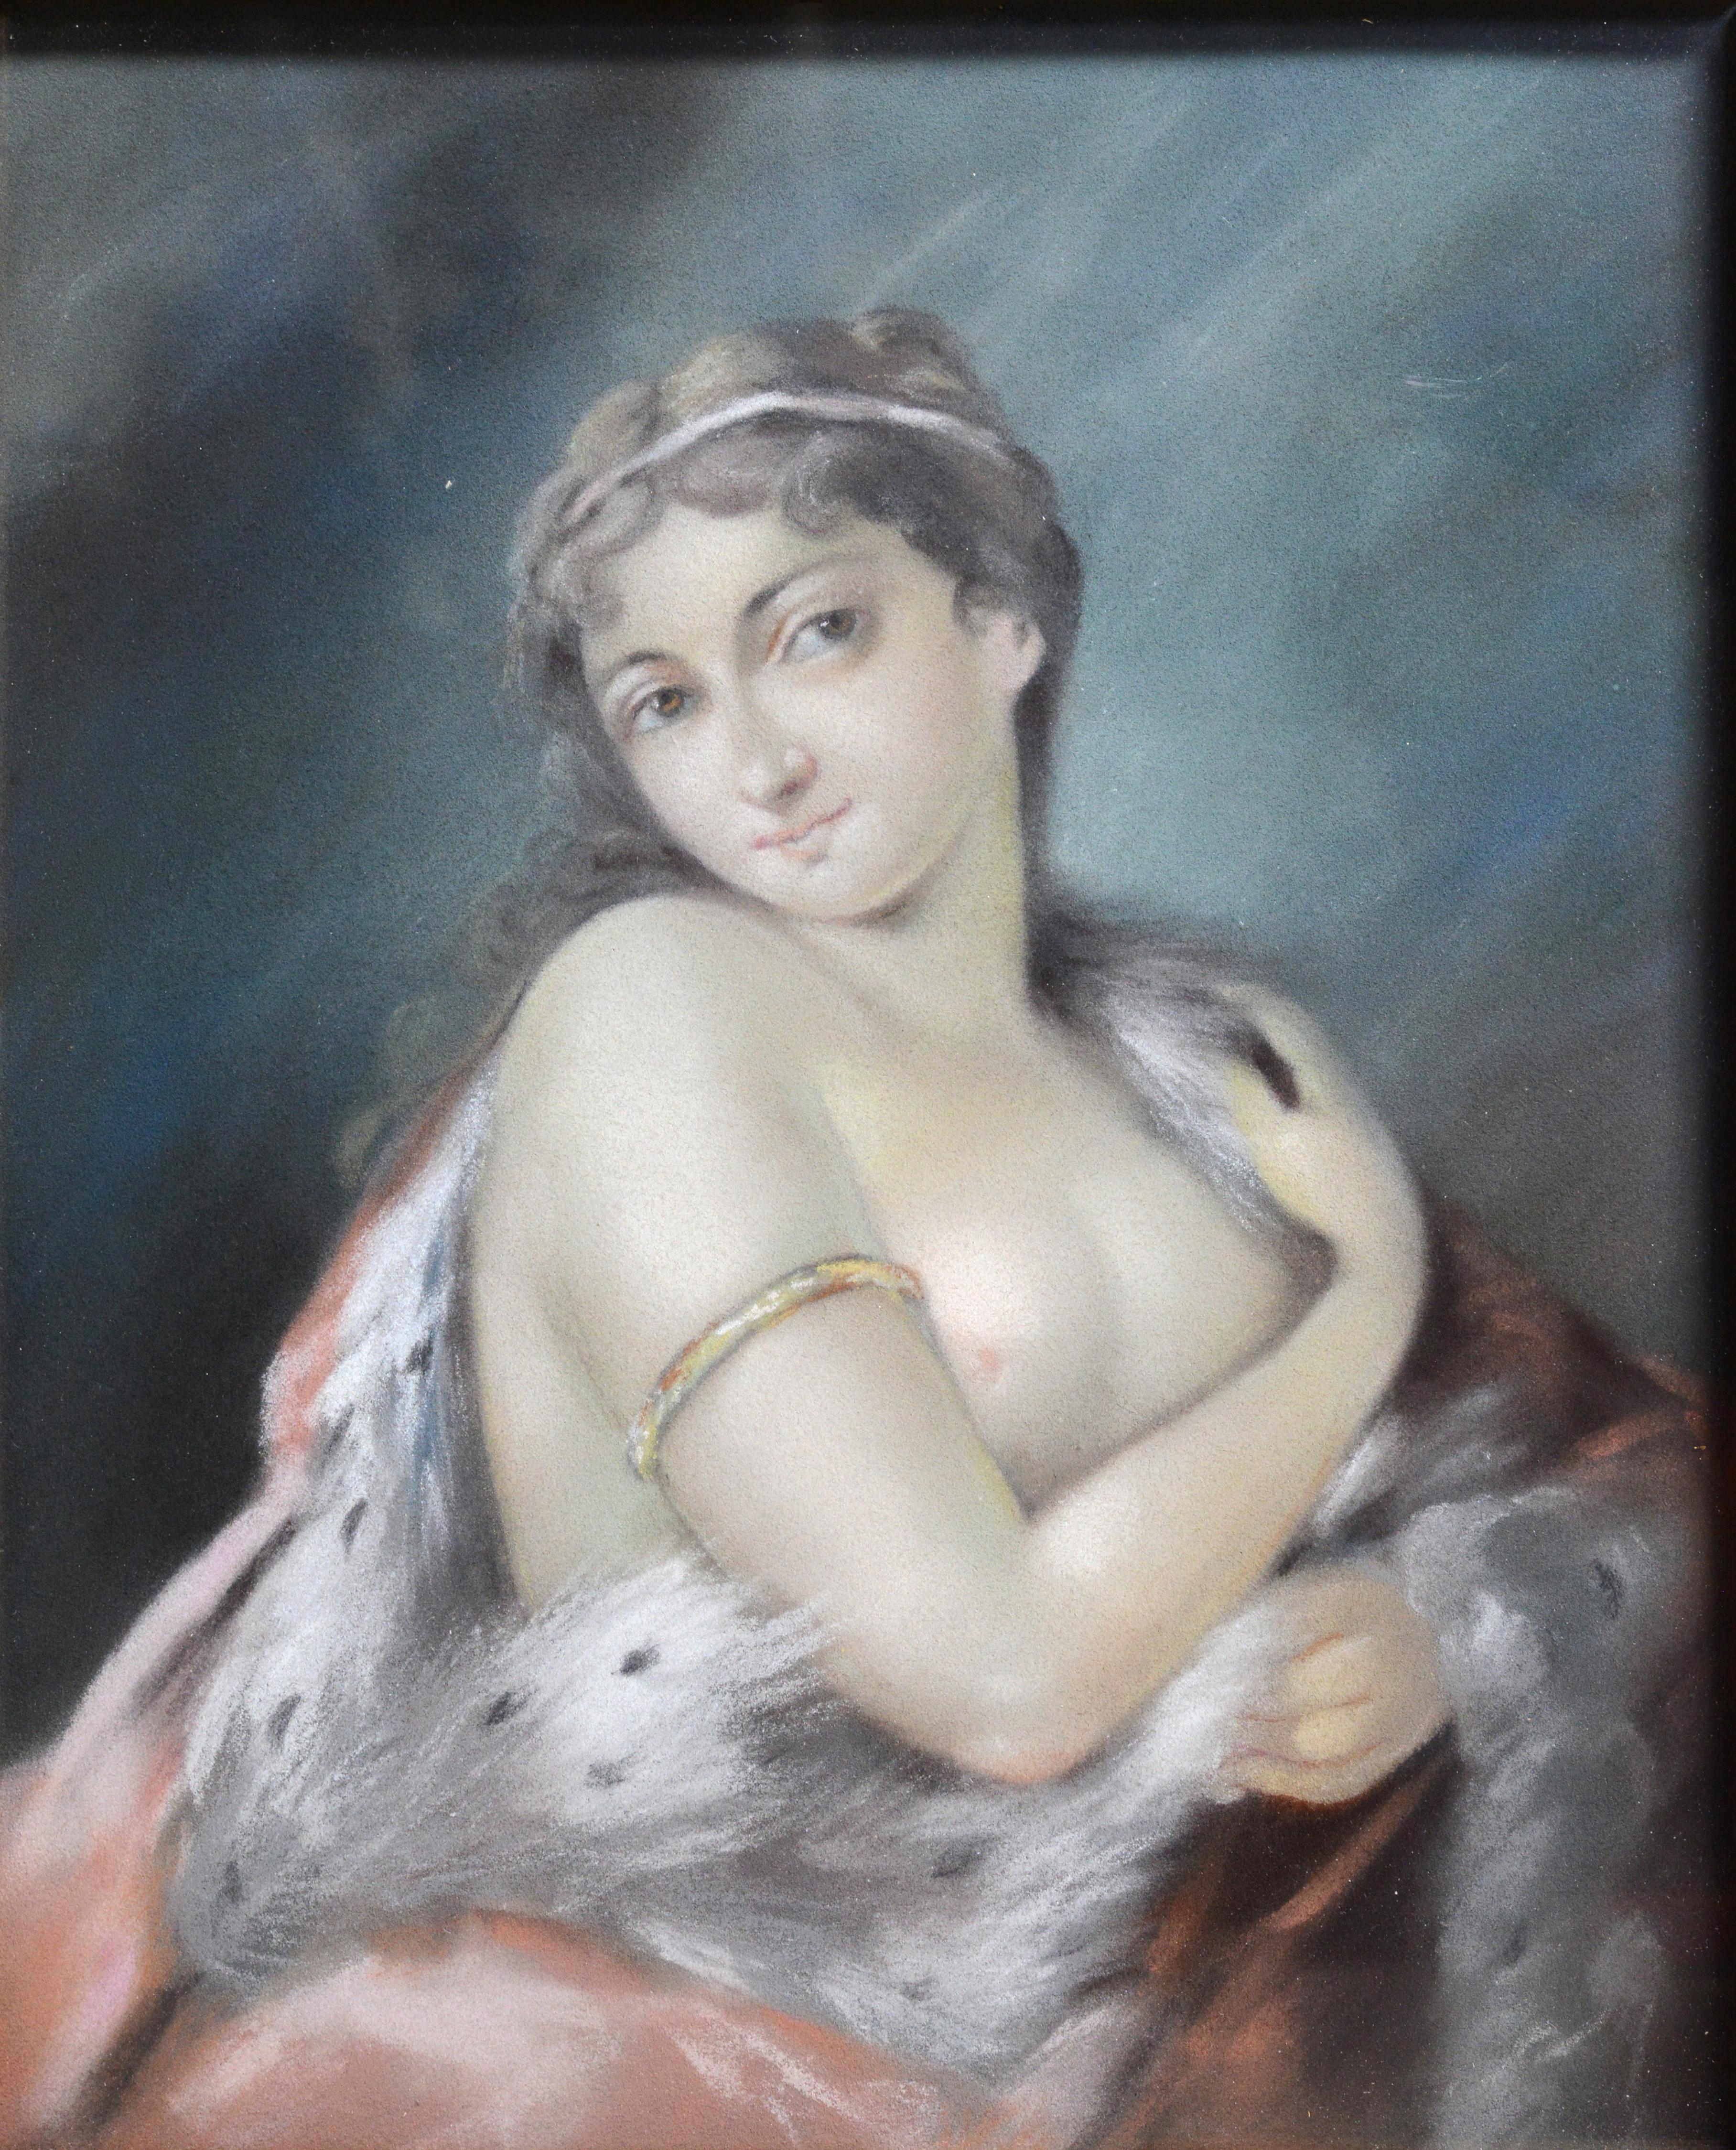 Rococo portrait Nude lady in Royal mantle Early 20th century Pastel drawing - Realist Art by Unknown